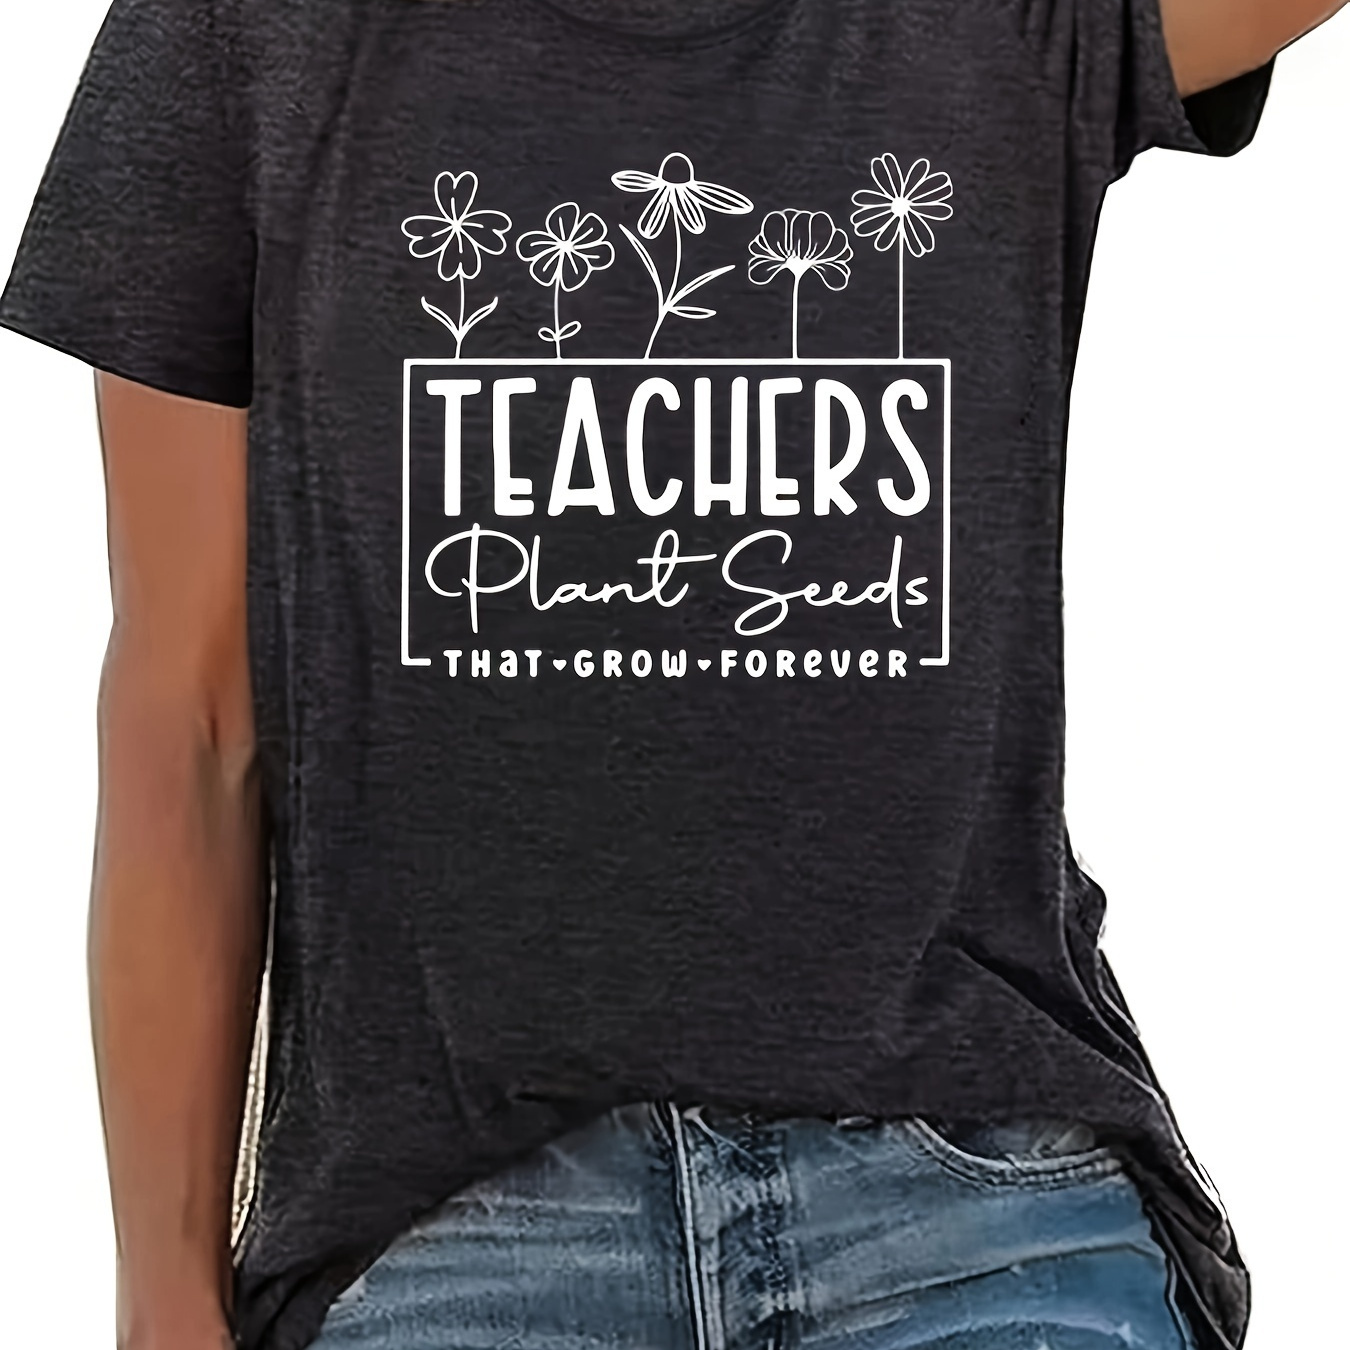 

Plus Size Teachers Plant Seeds That Grow Forever T-shirt, Casual Short Sleeve Crew Neck Top For Summer, Women's Plus Size Clothing